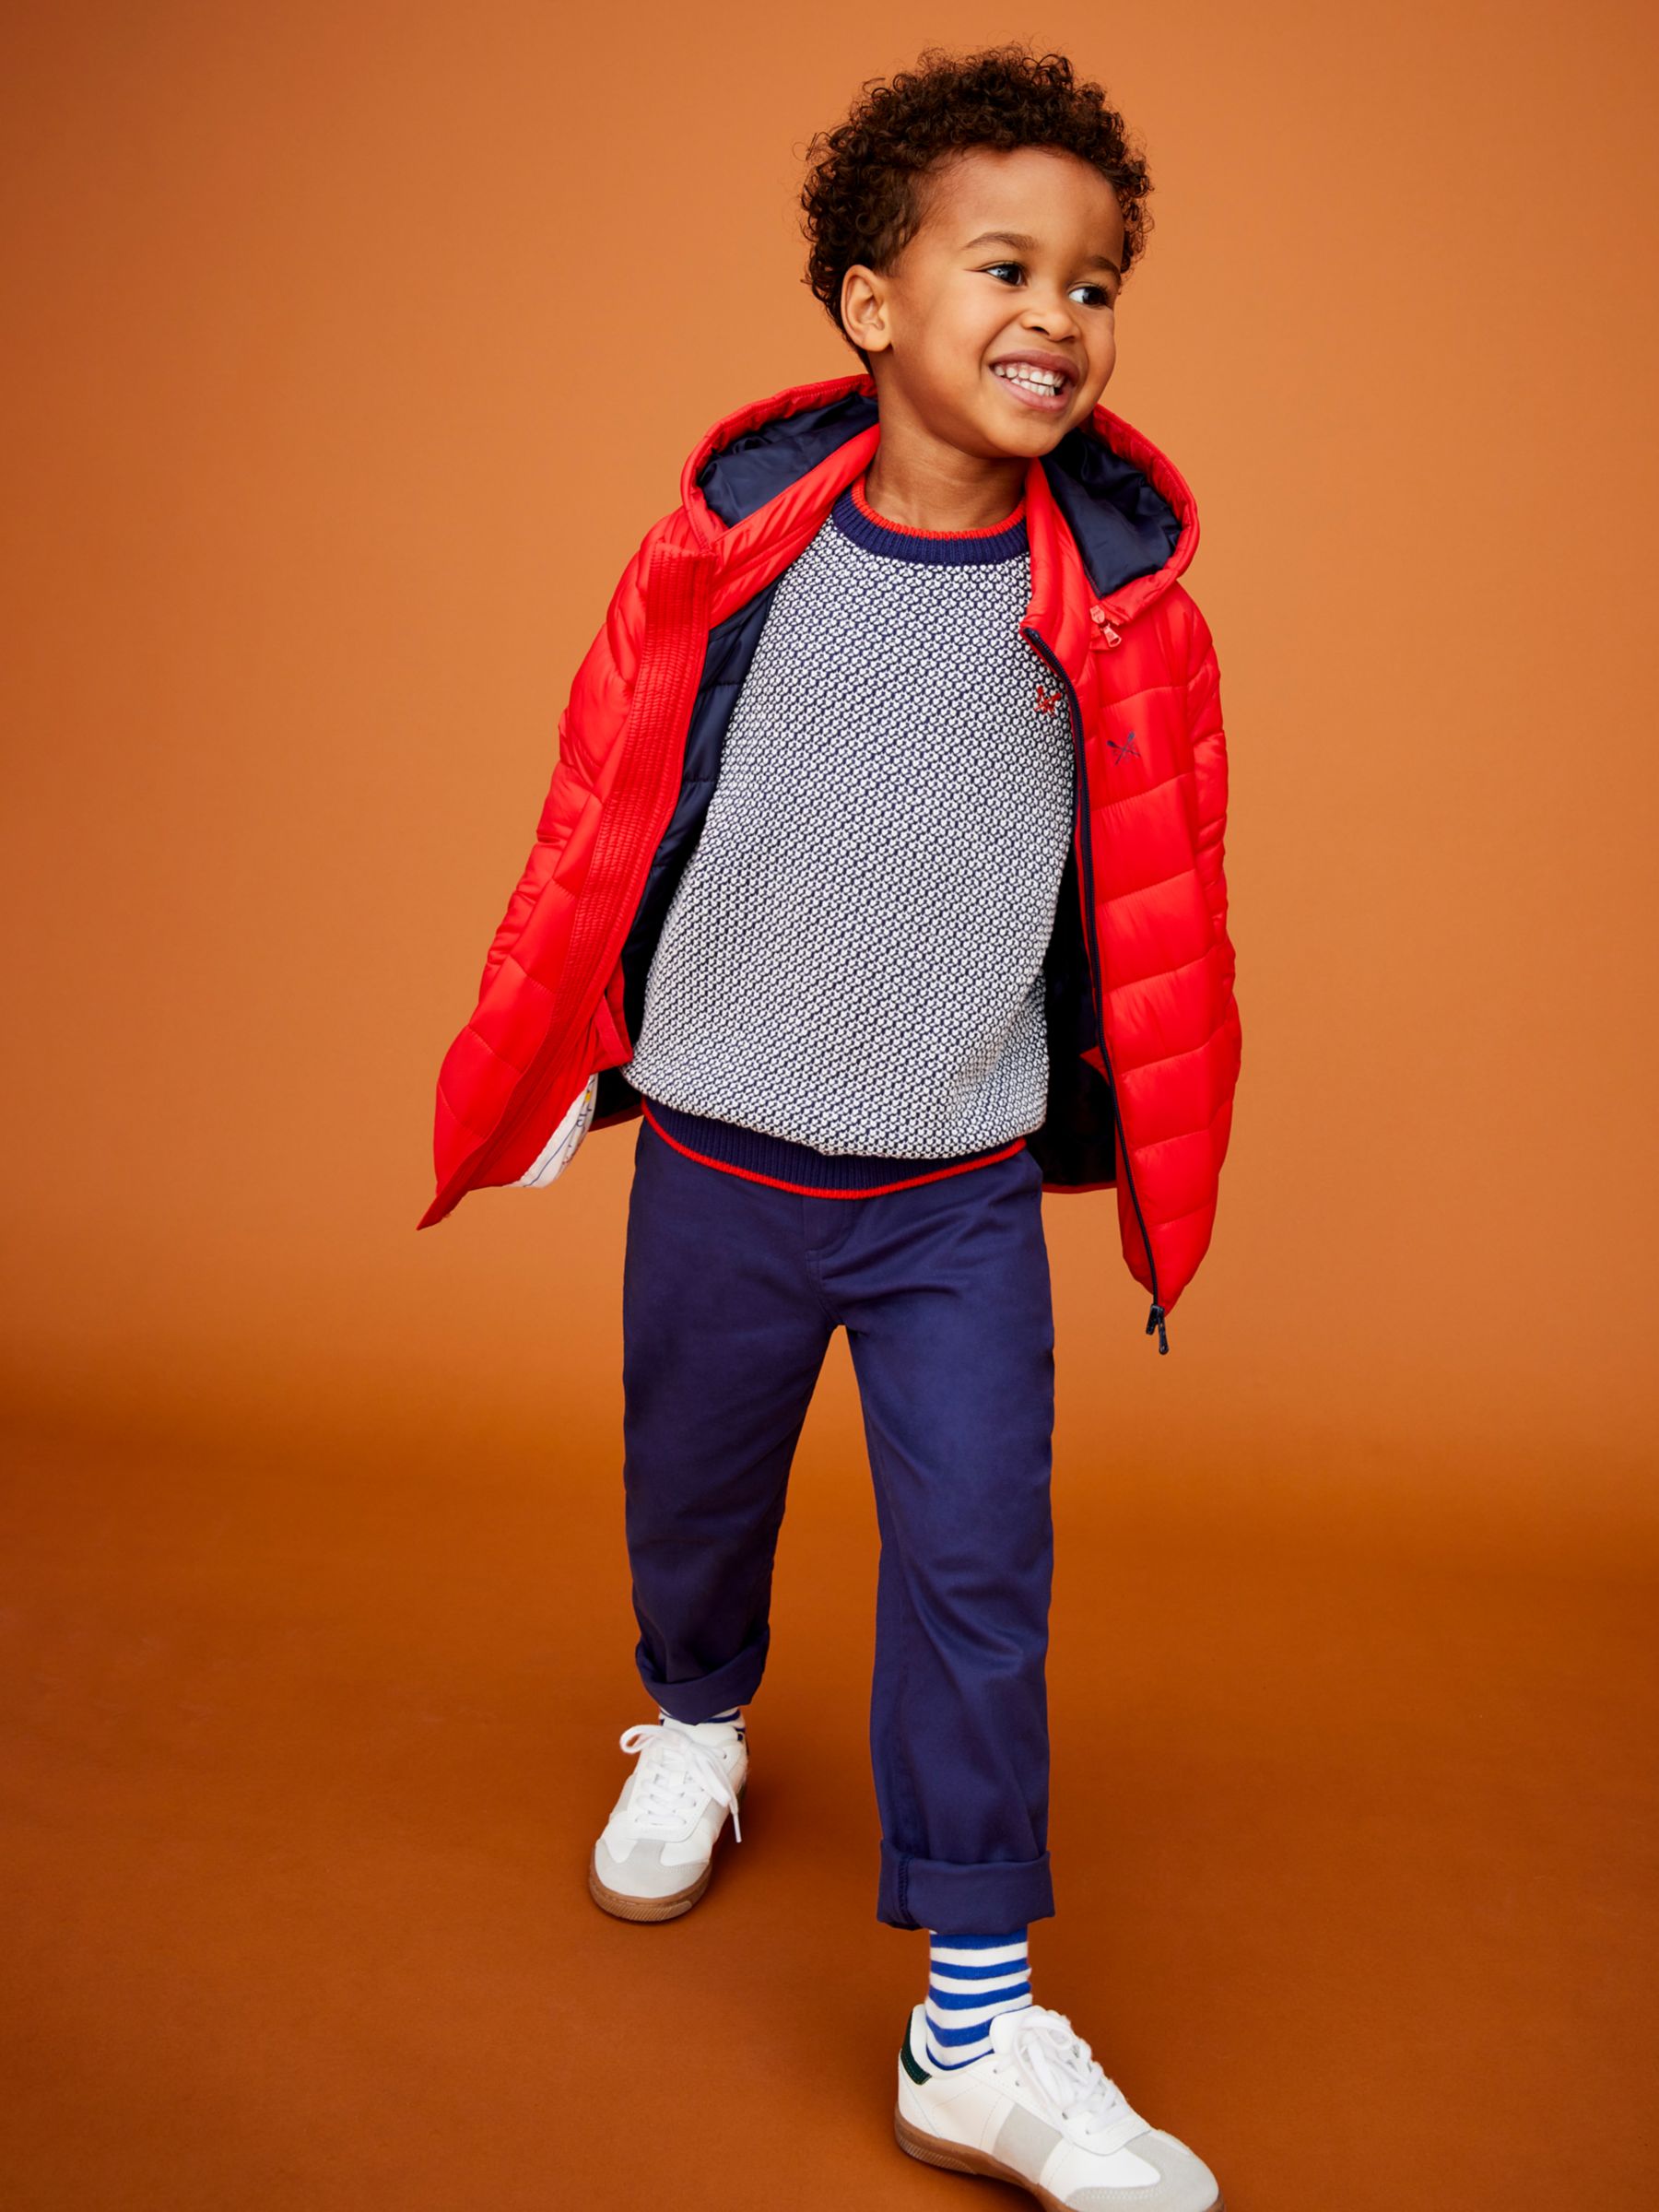 Crew Clothing Kids' Plain Quilted Jacket, Red at John Lewis & Partners